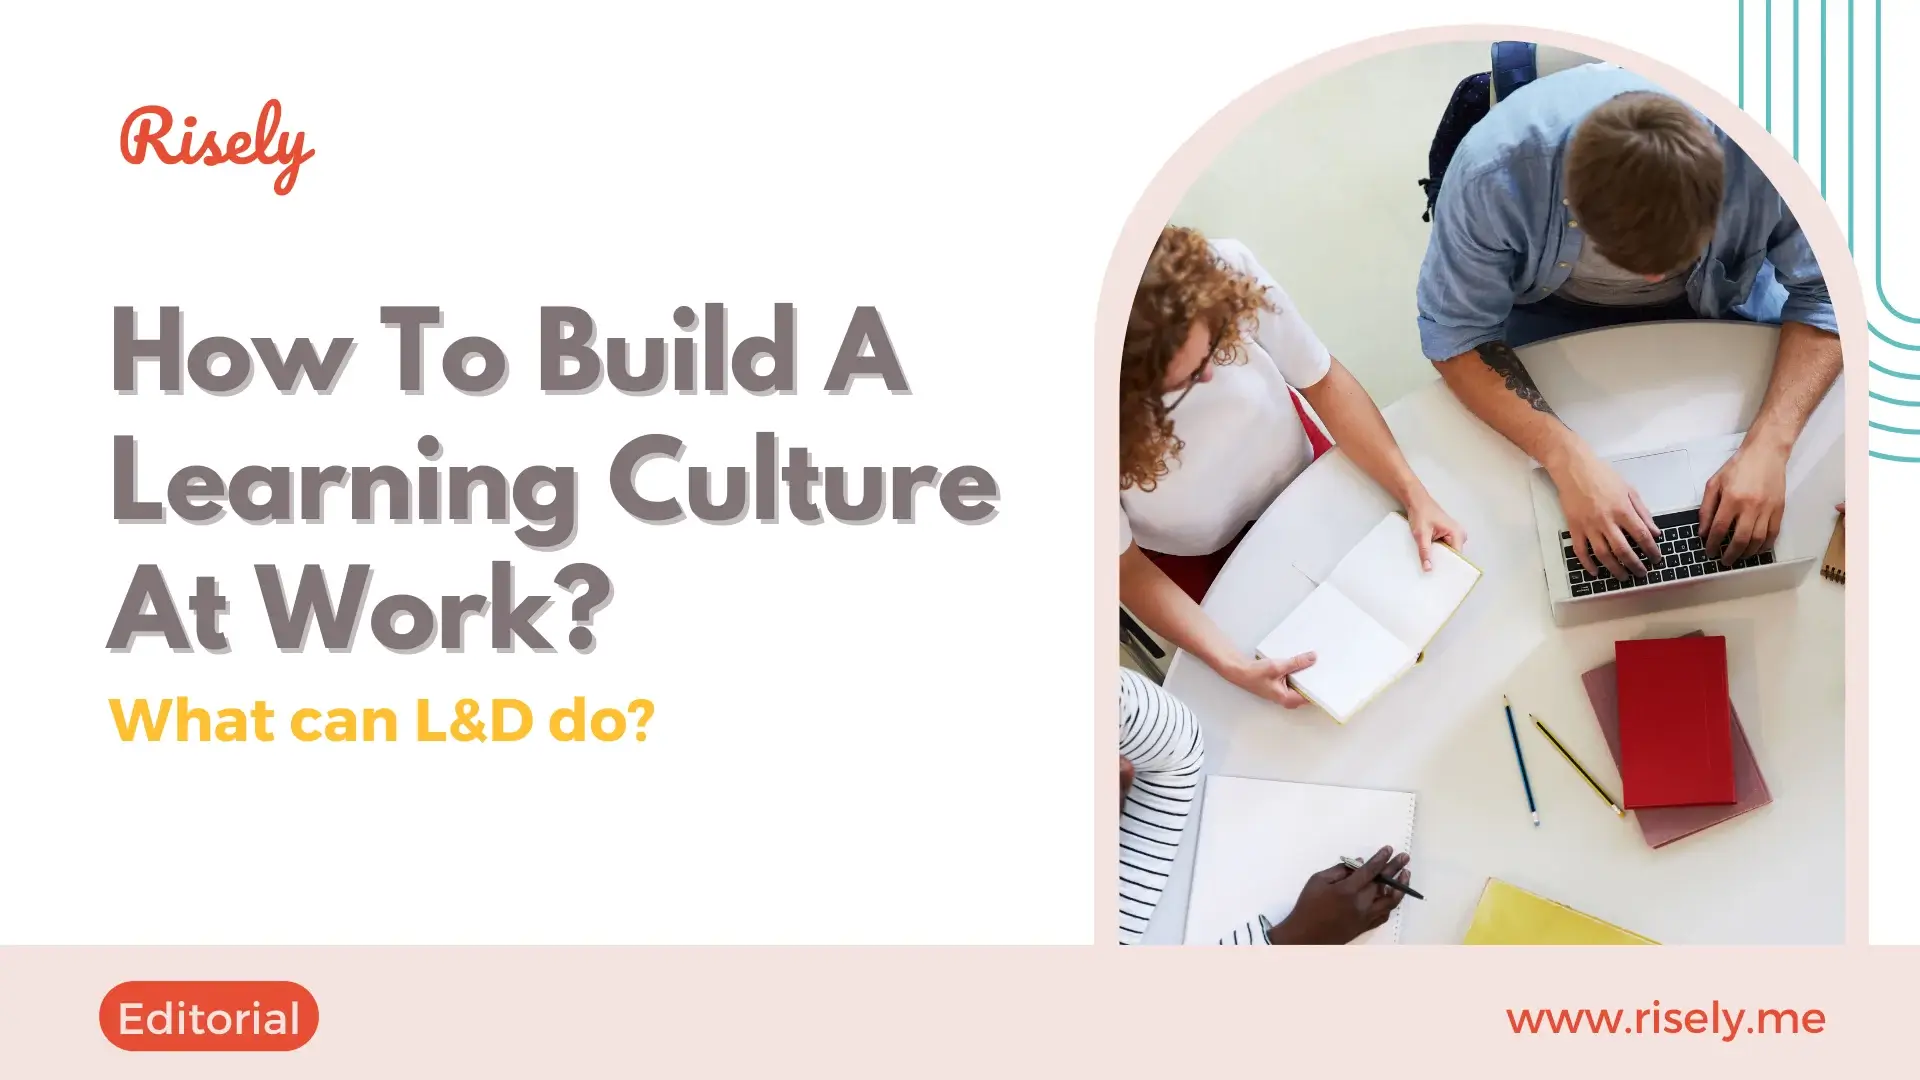 How To Build A Learning Culture At Work?